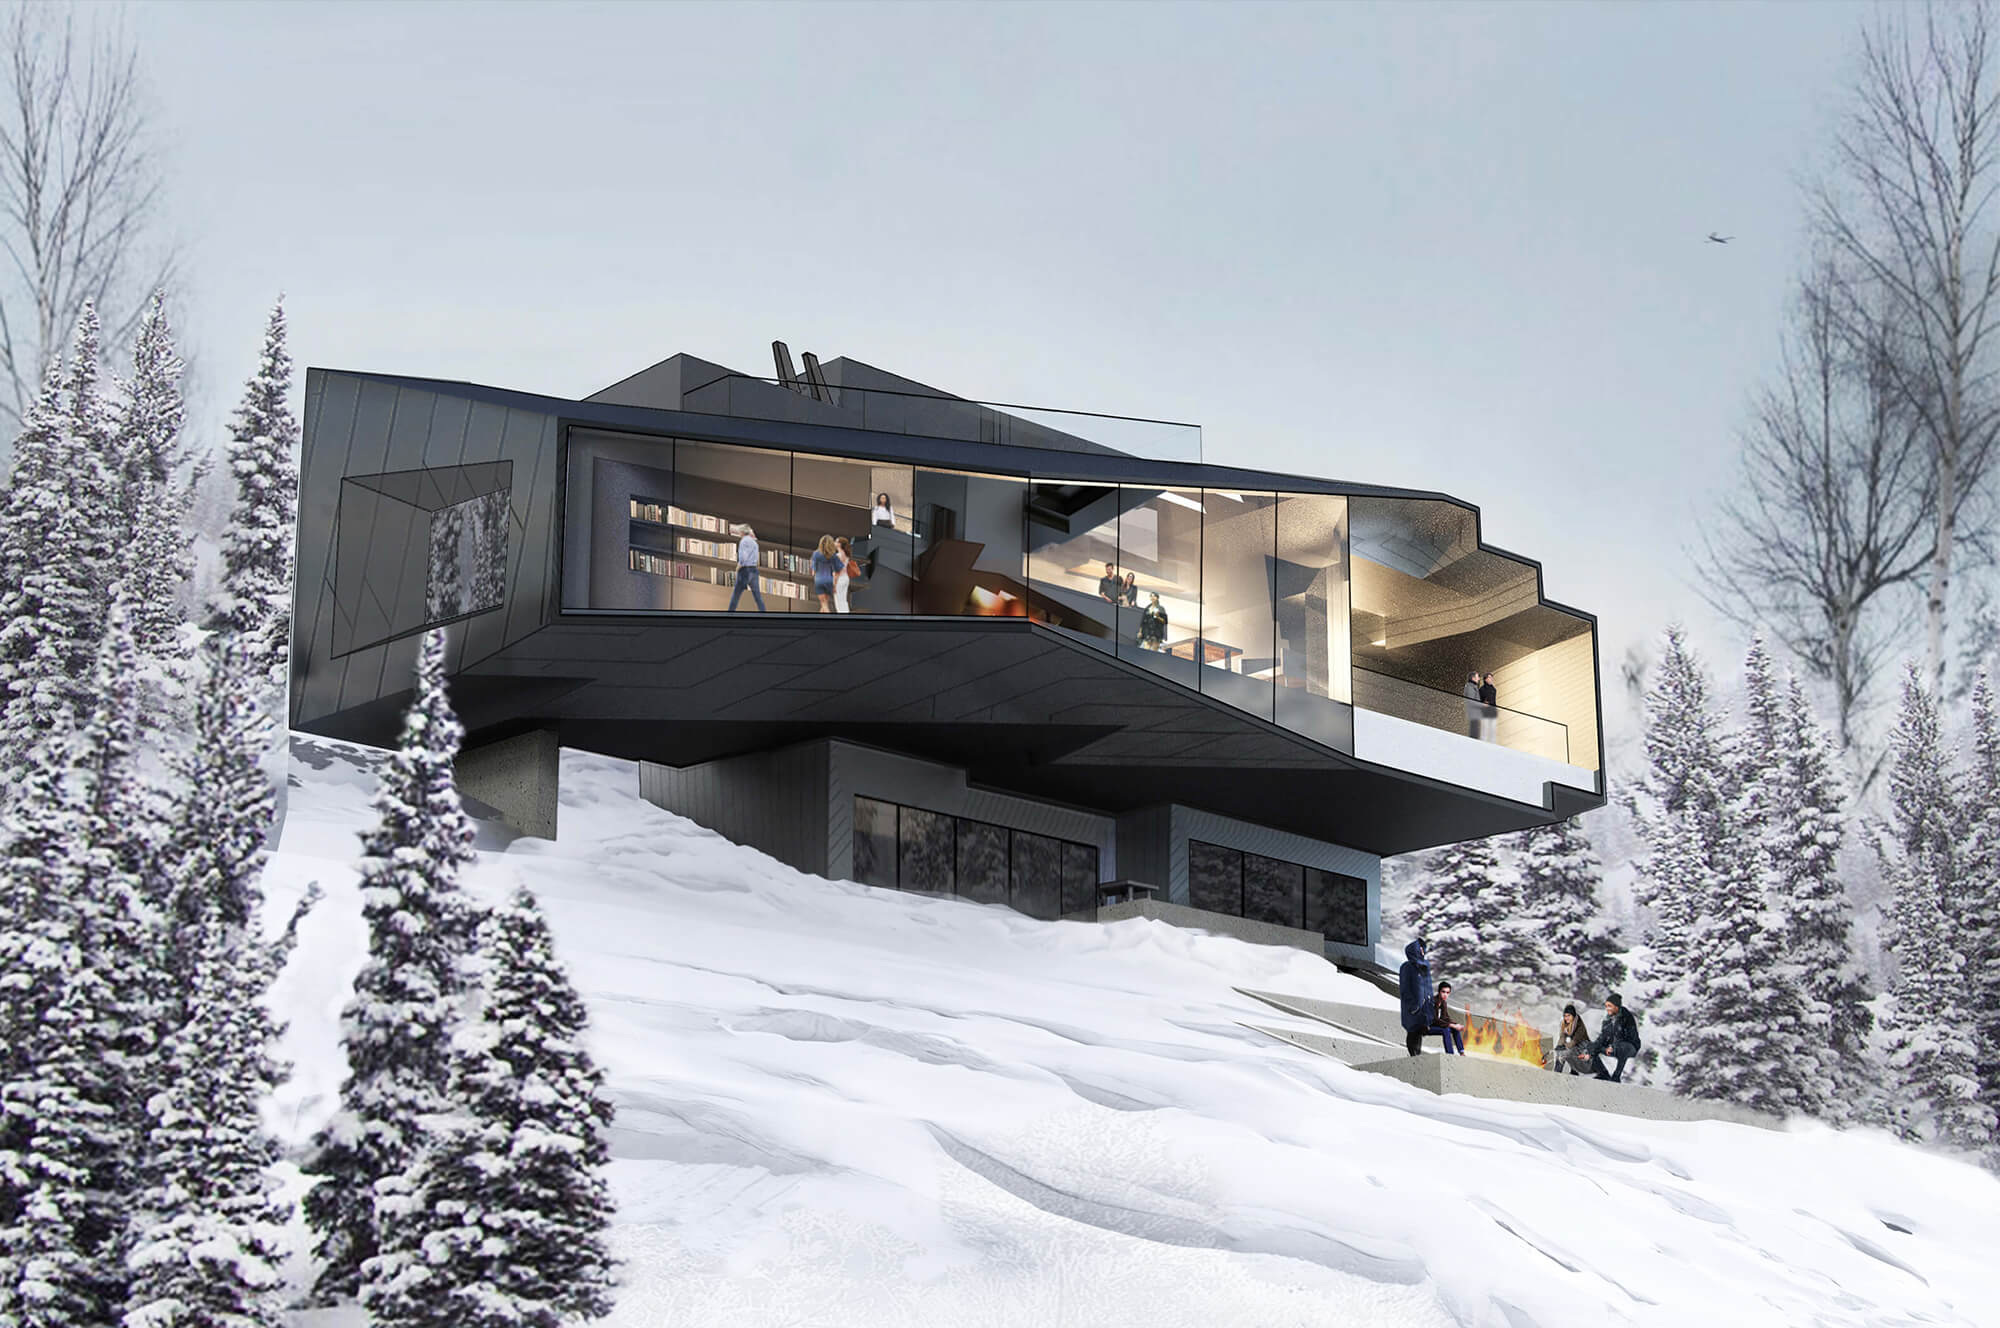 Home on snowy slope with trees atop Summit Powder Mountain